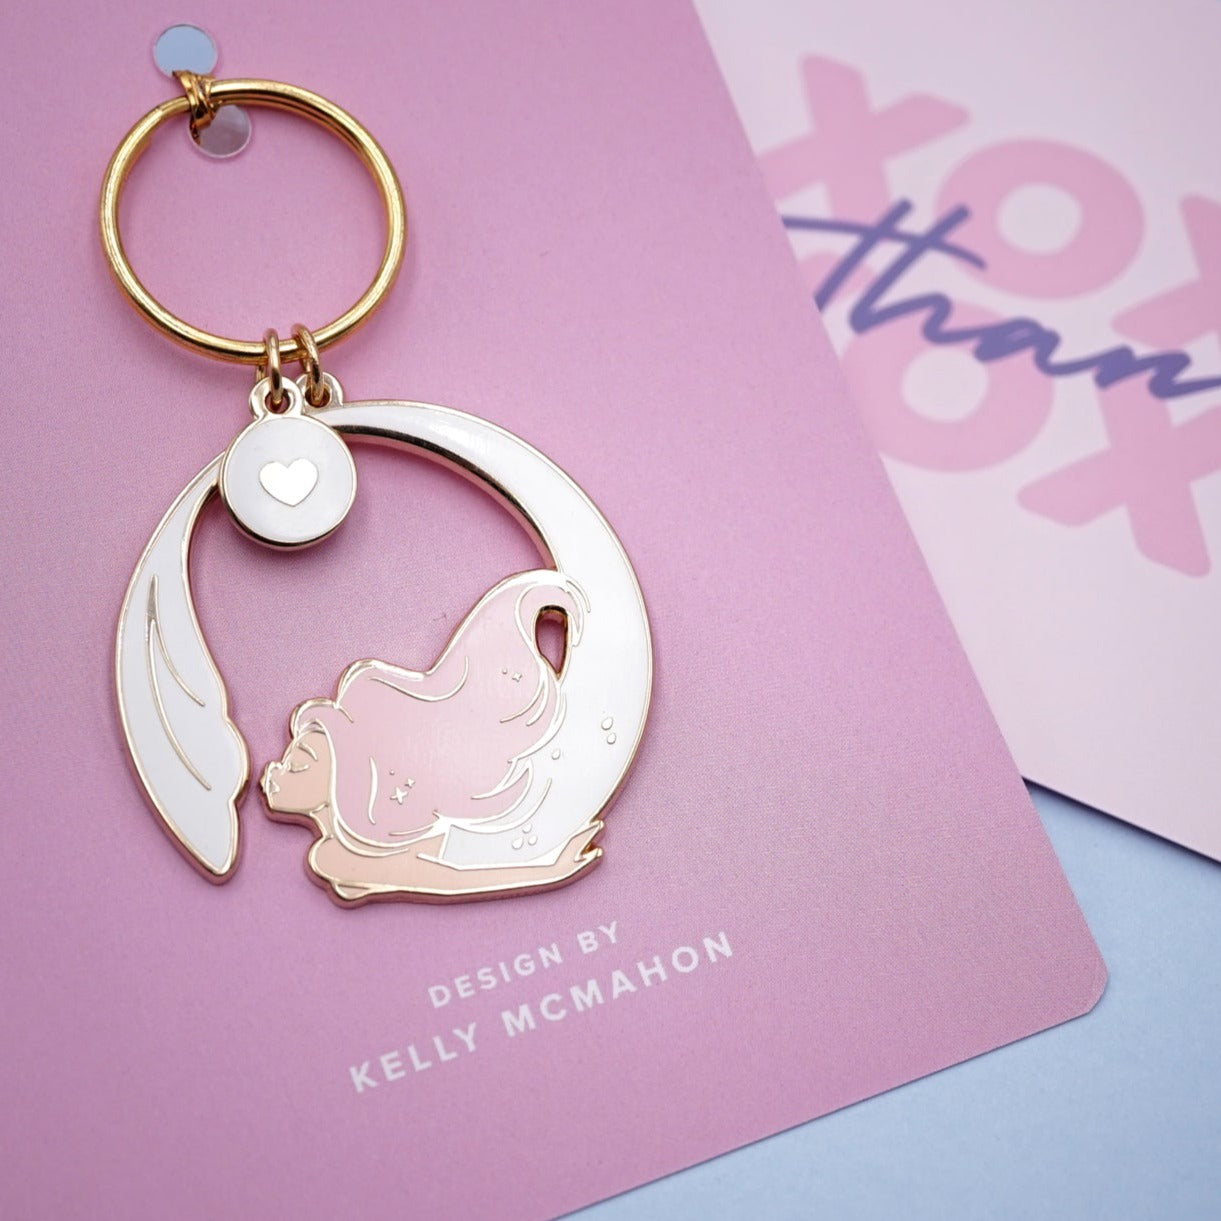 Mermaid Keychain in a backing card with "DESIGN BY KELLY MCMAHON" text